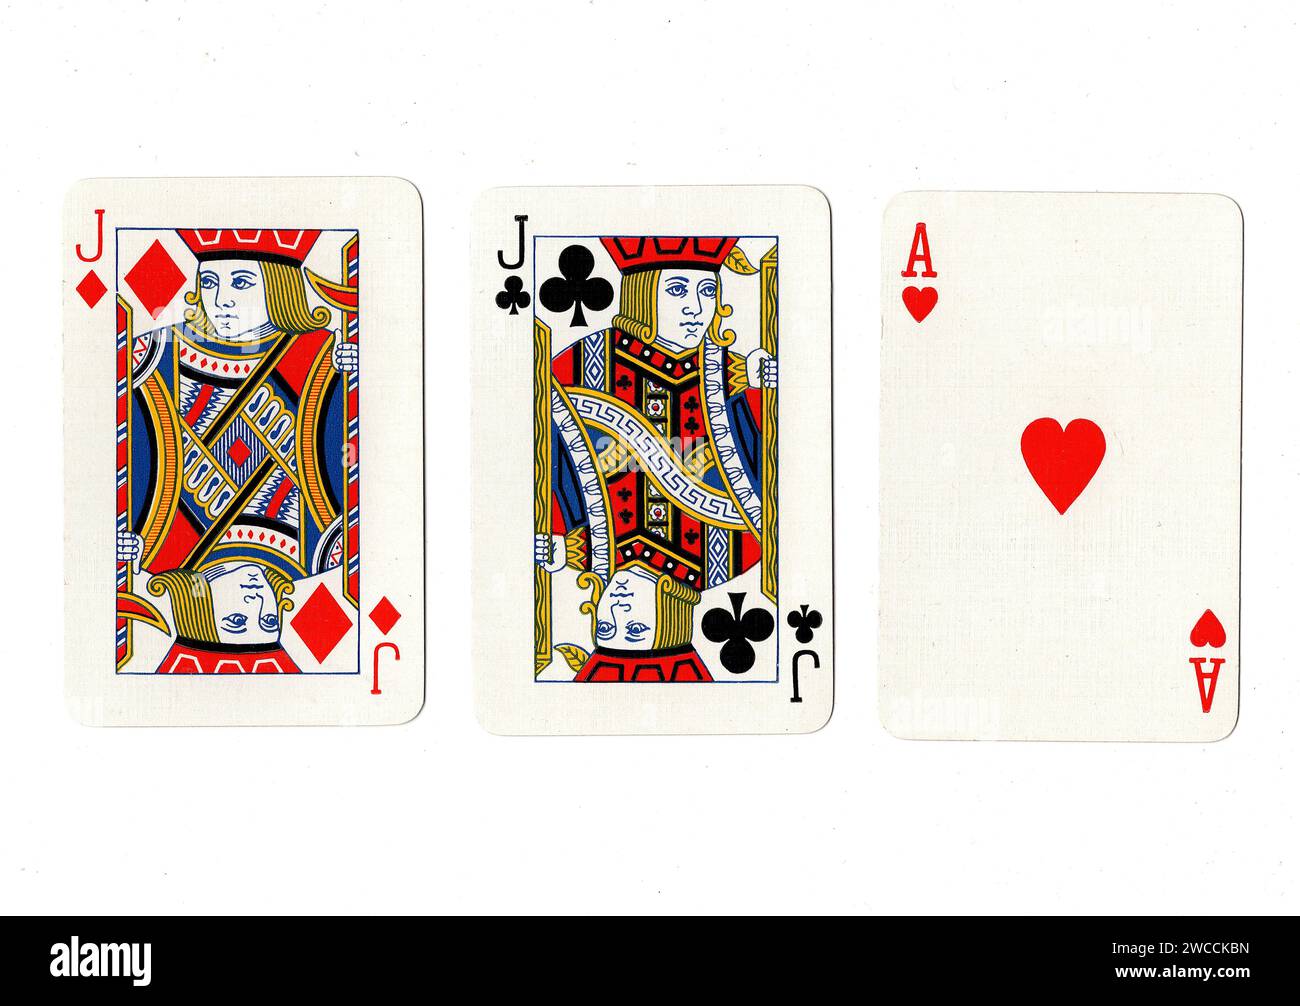 Vintage playing cards showing a pair of jacks and an ace isolated on a white background. Stock Photo